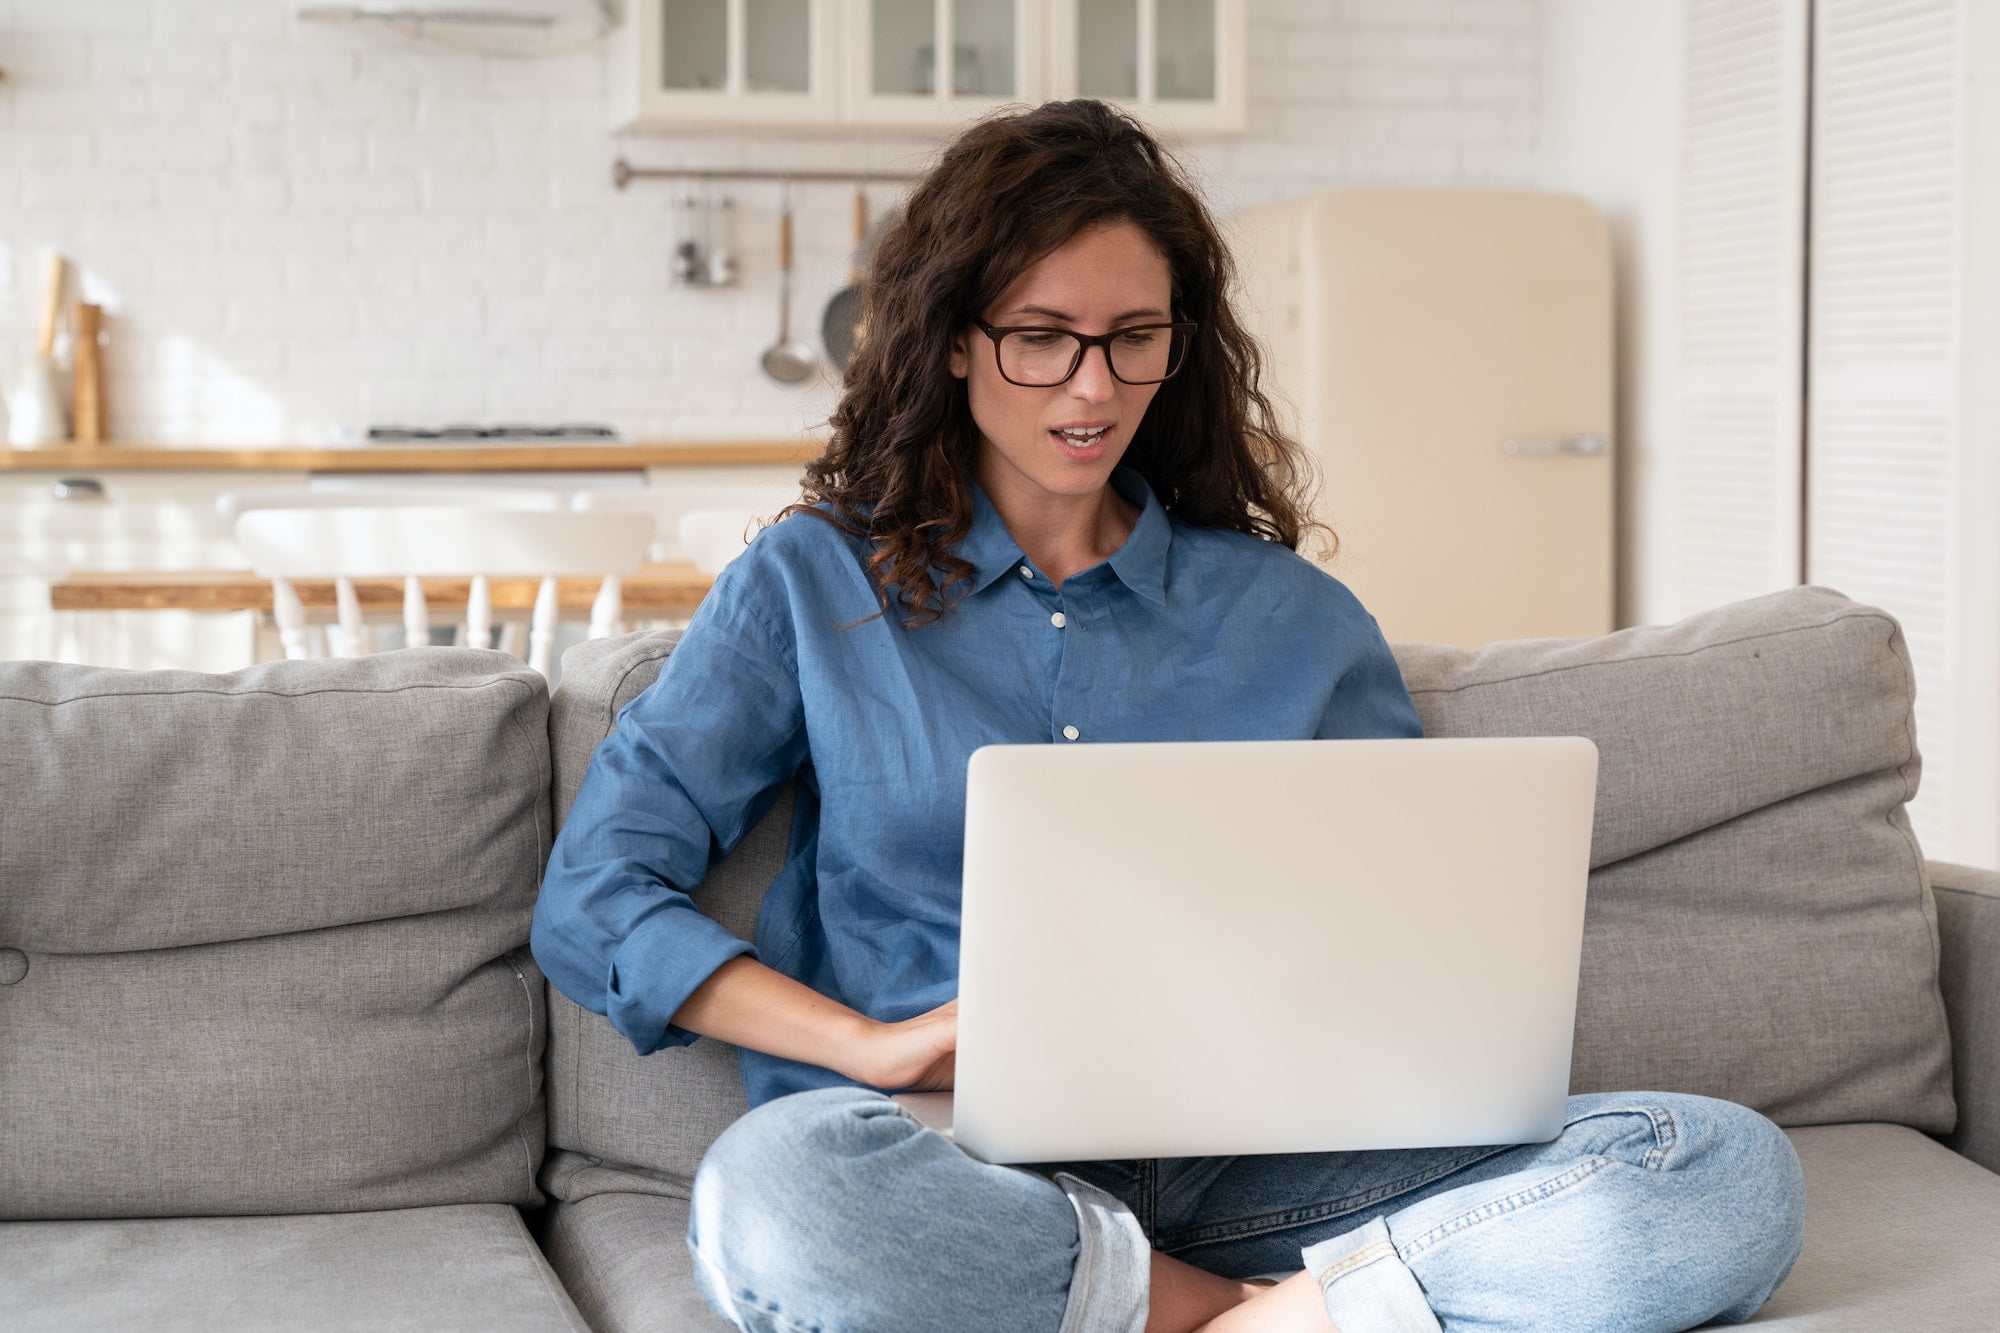 Frustrated woman look on laptop screen with open mouth and distrust on face sitting on sofa at home